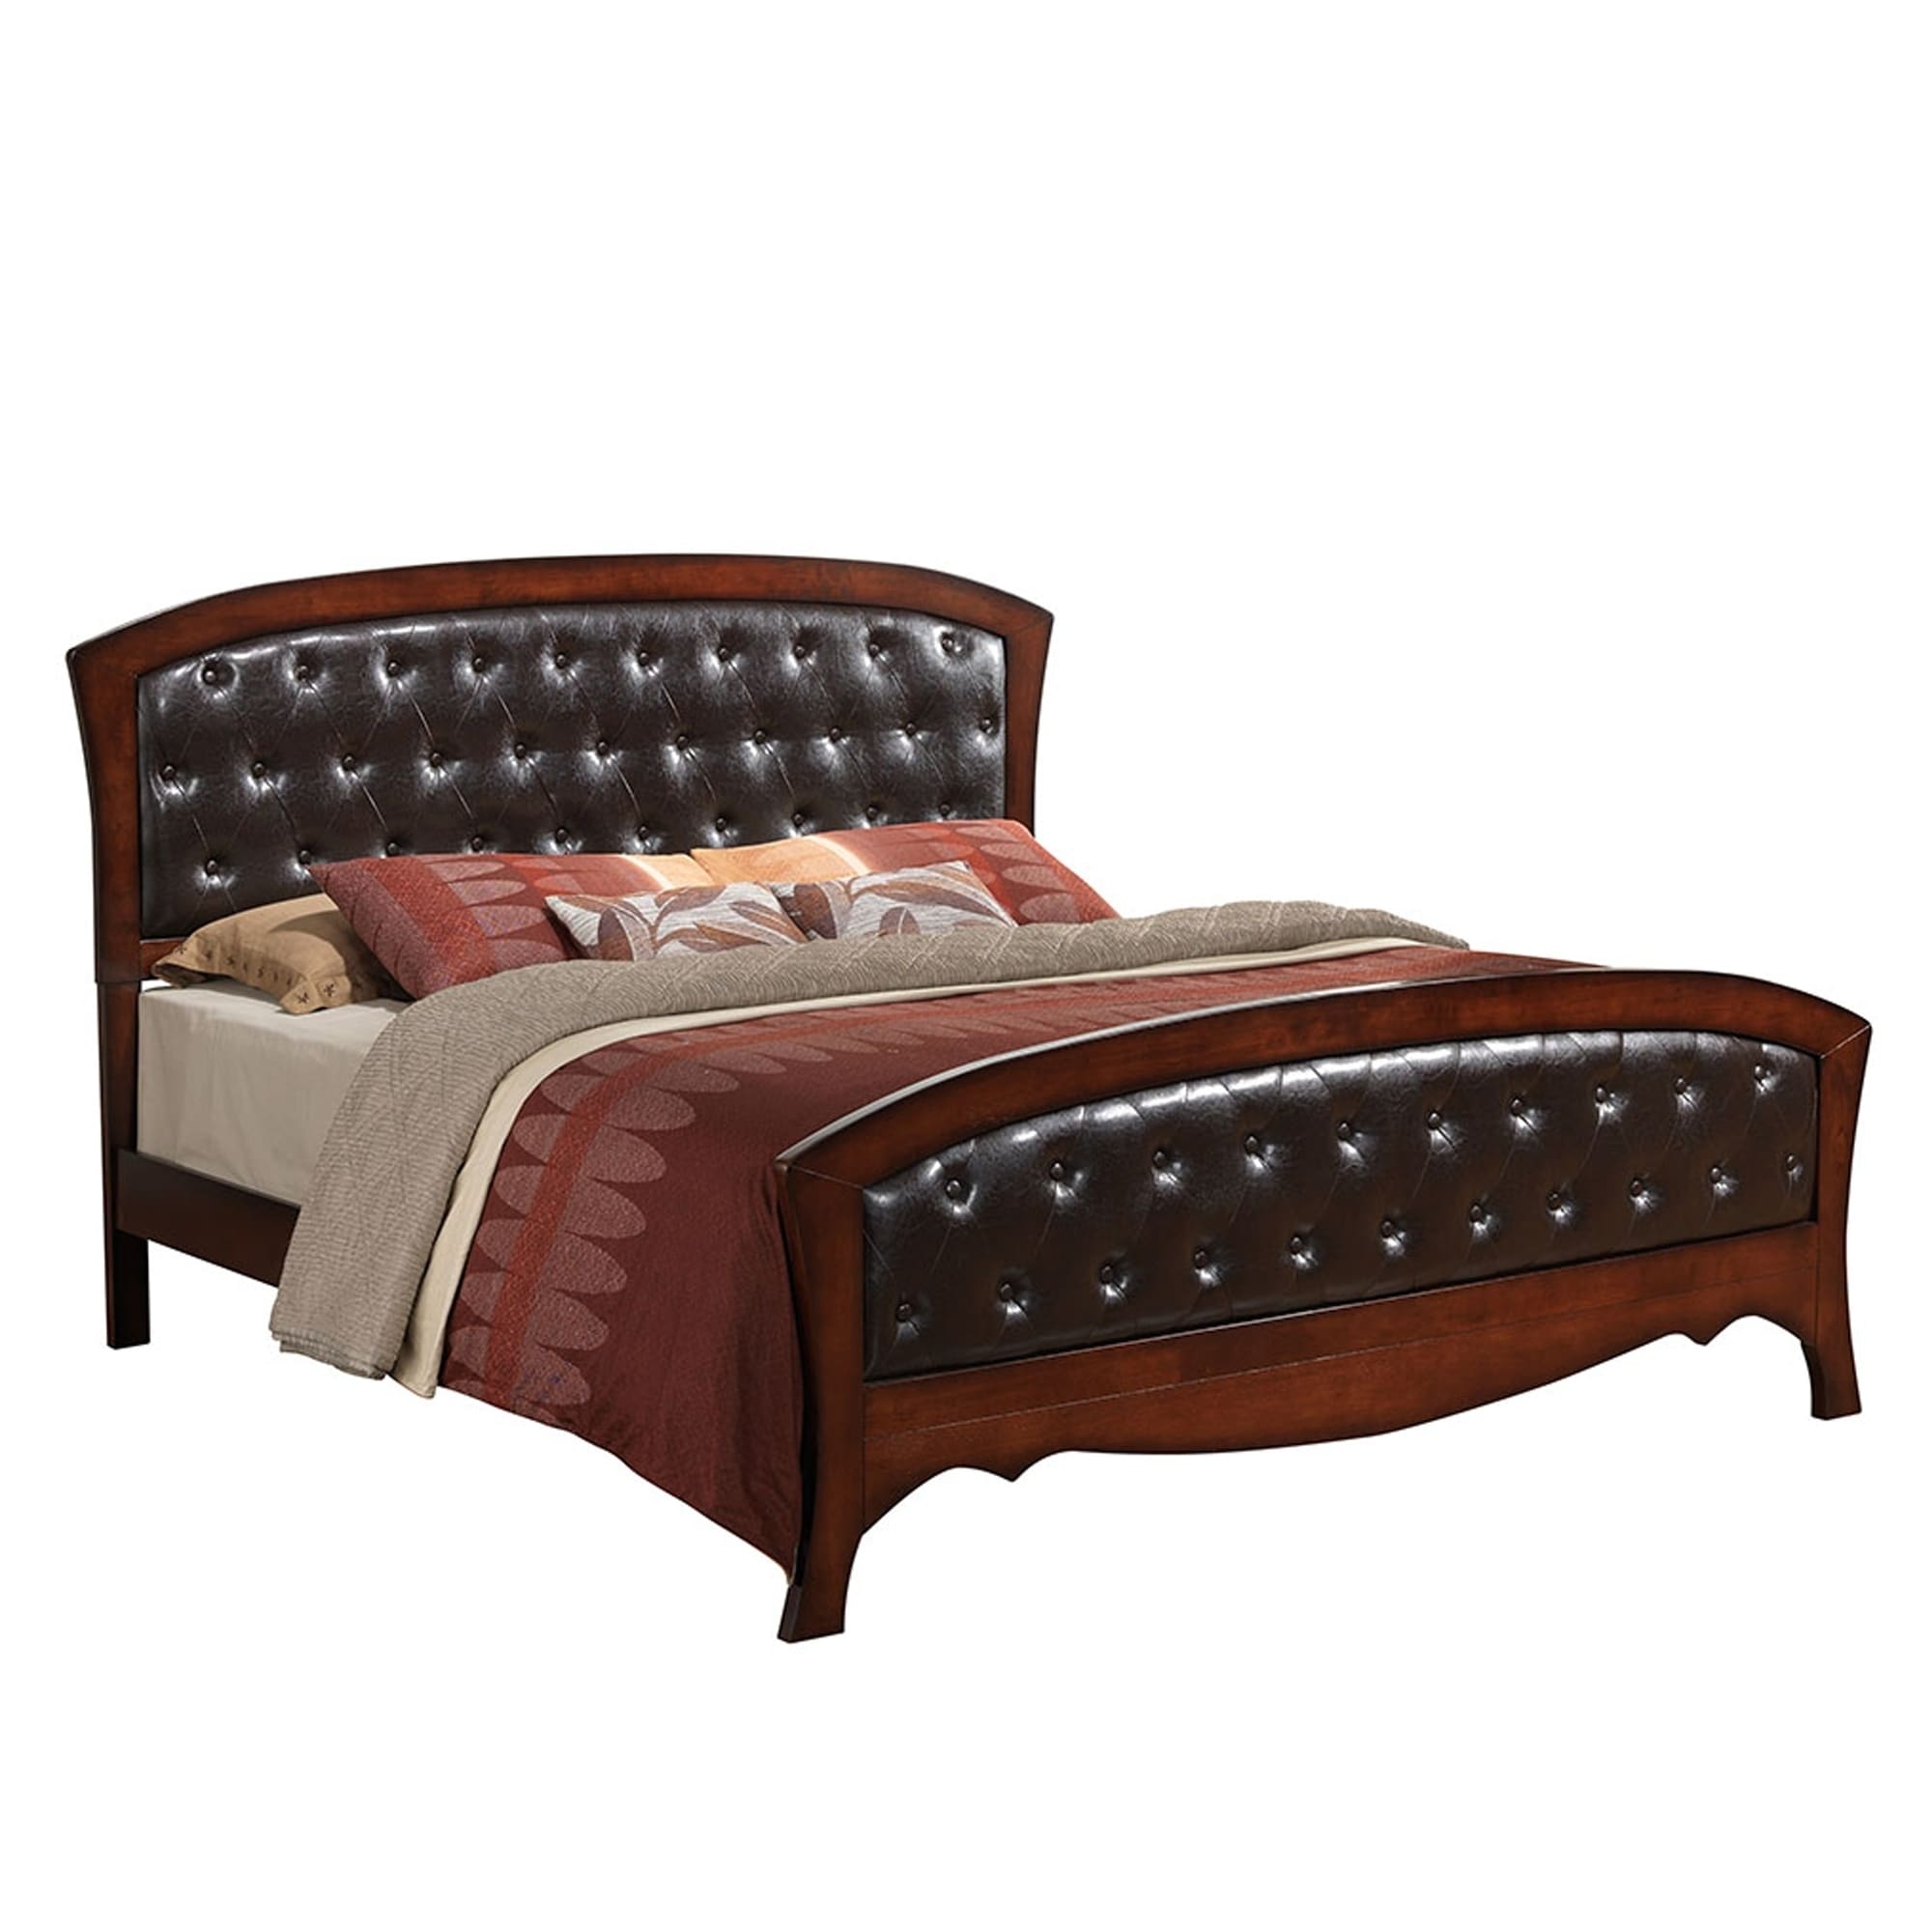 Juliana Medium Espresso Faux Leather King size Or Queen size Bed